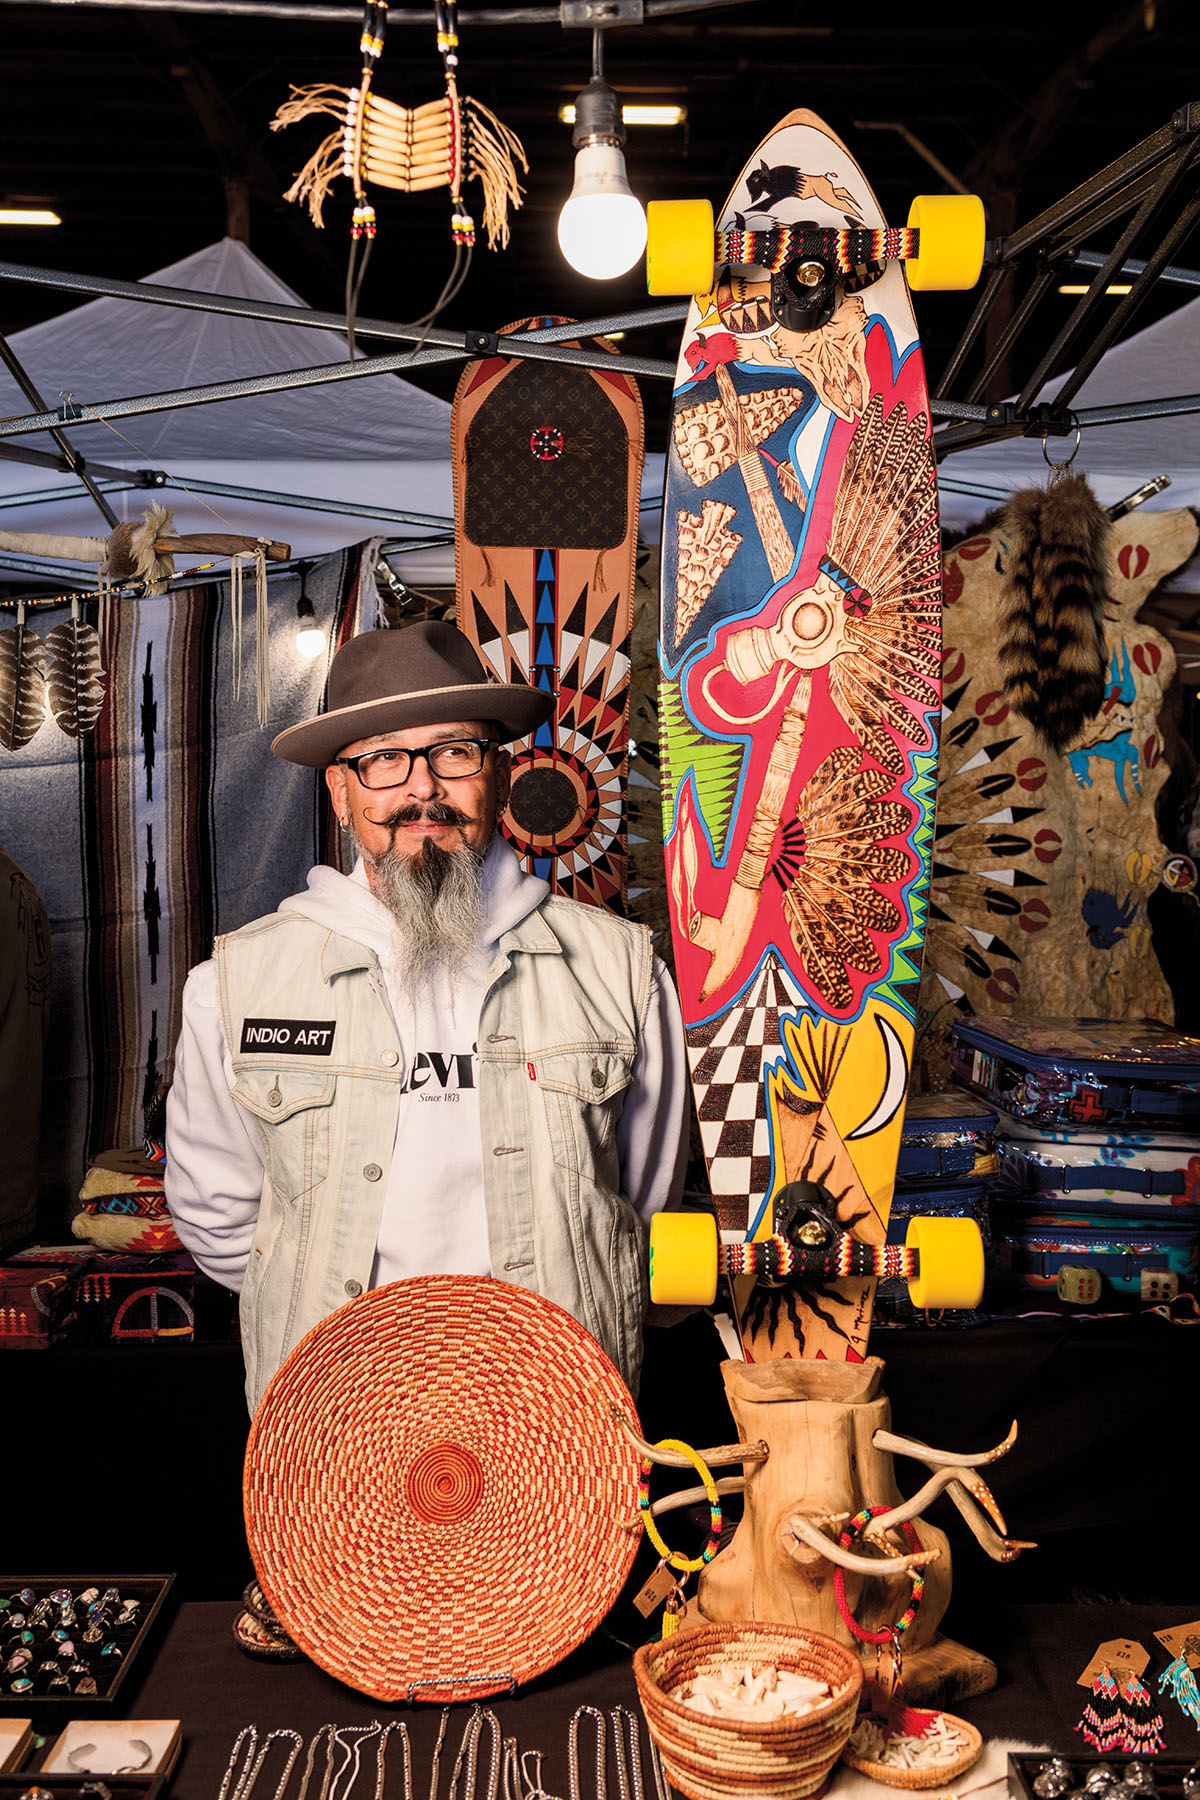 A man with a hat and long beard stands next to a brightly-painted skateboard